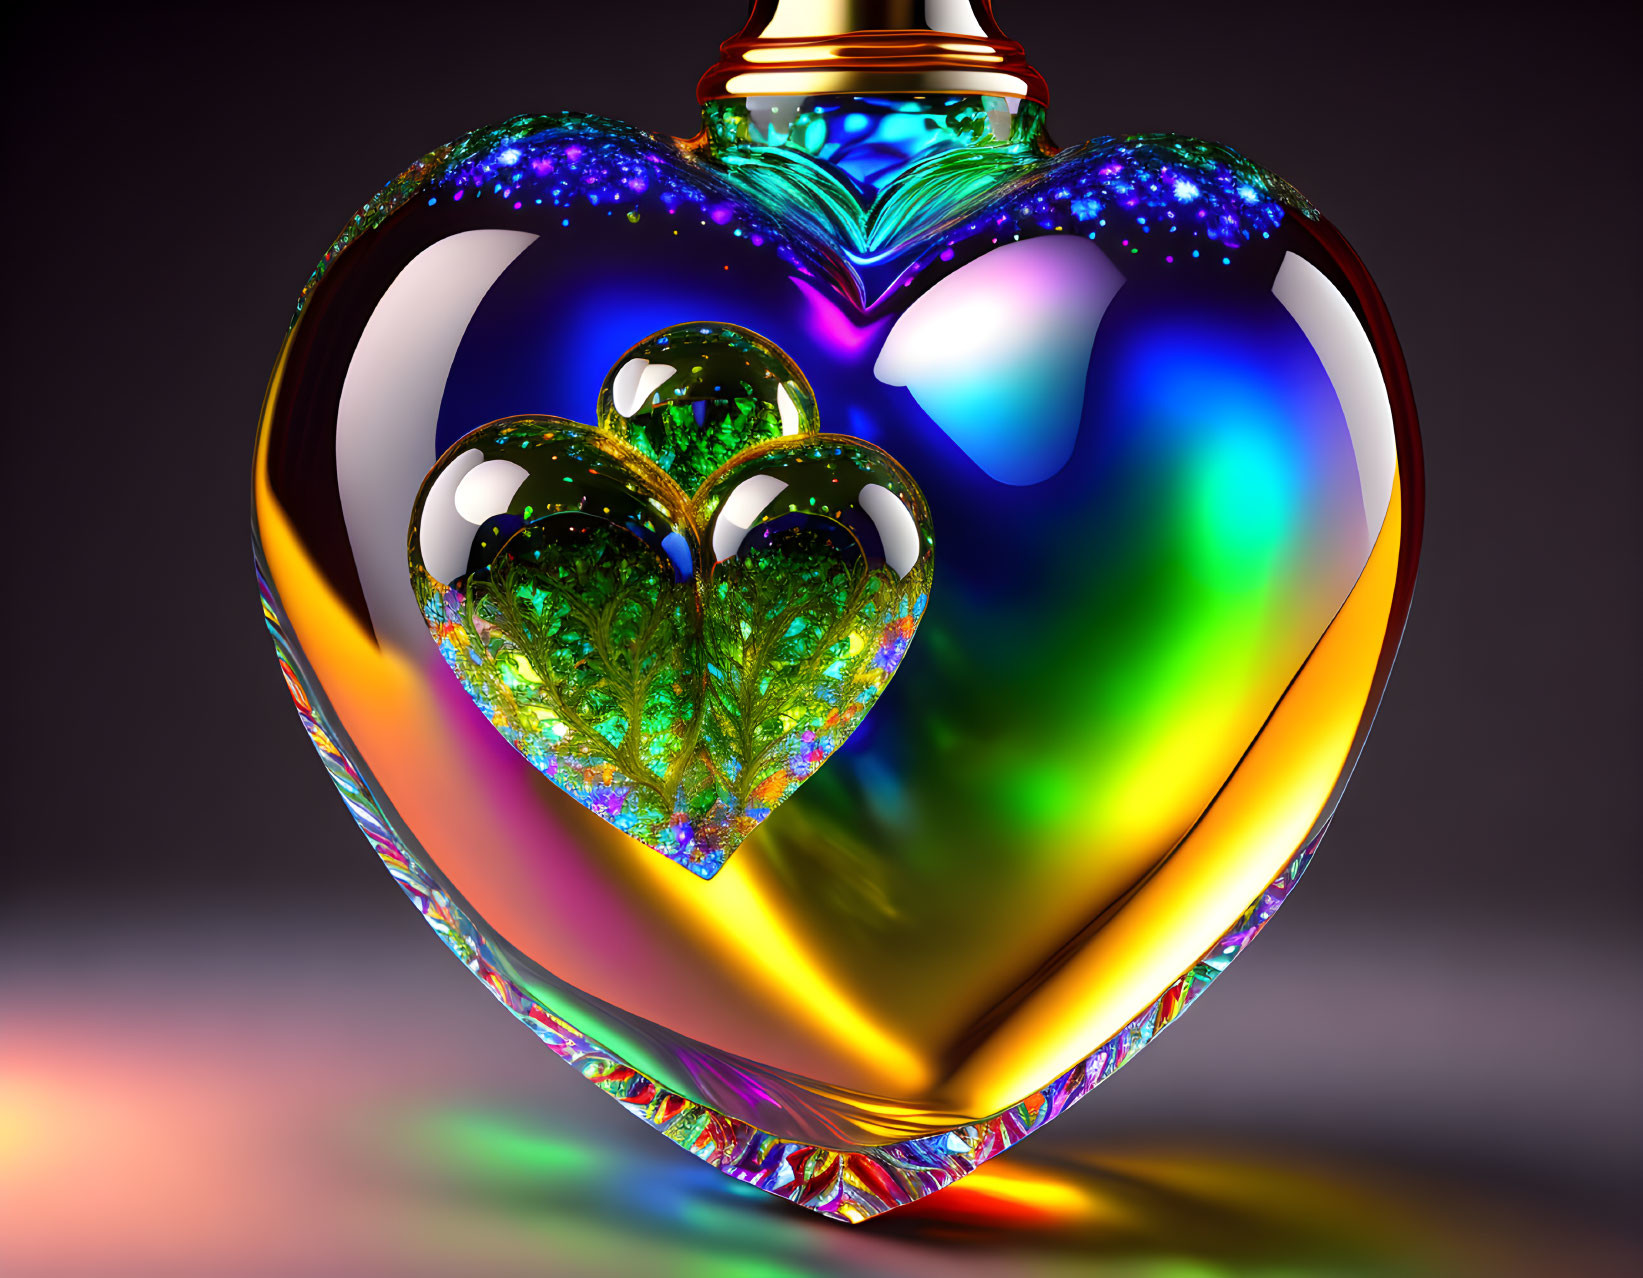 Colorful 3D Heart-shaped Ornament with Fractal Patterns